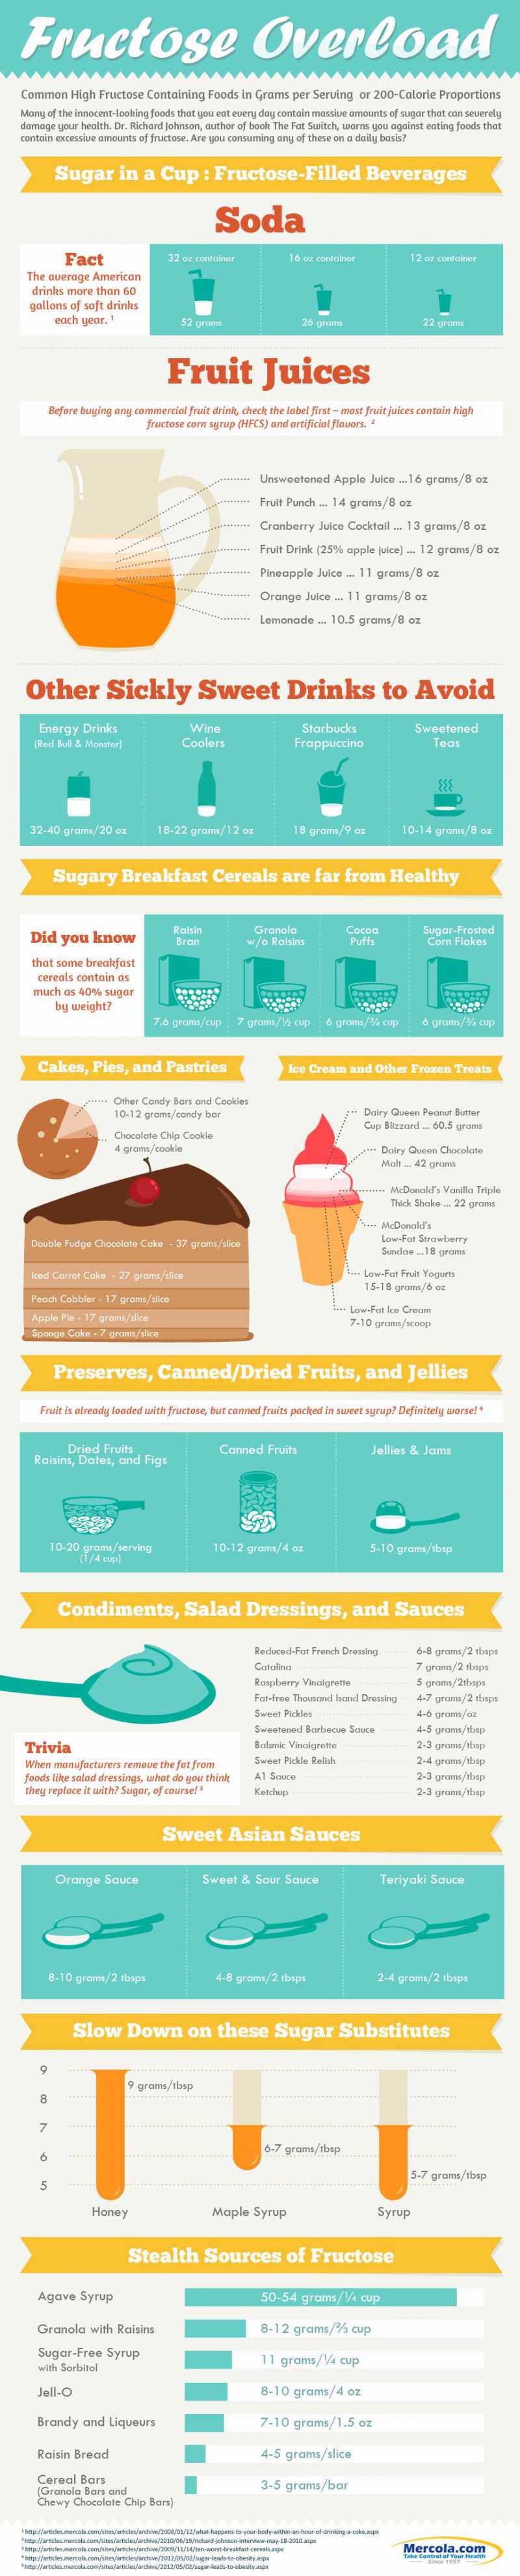 Foods High in Sugar - Fructose Overload Infographic